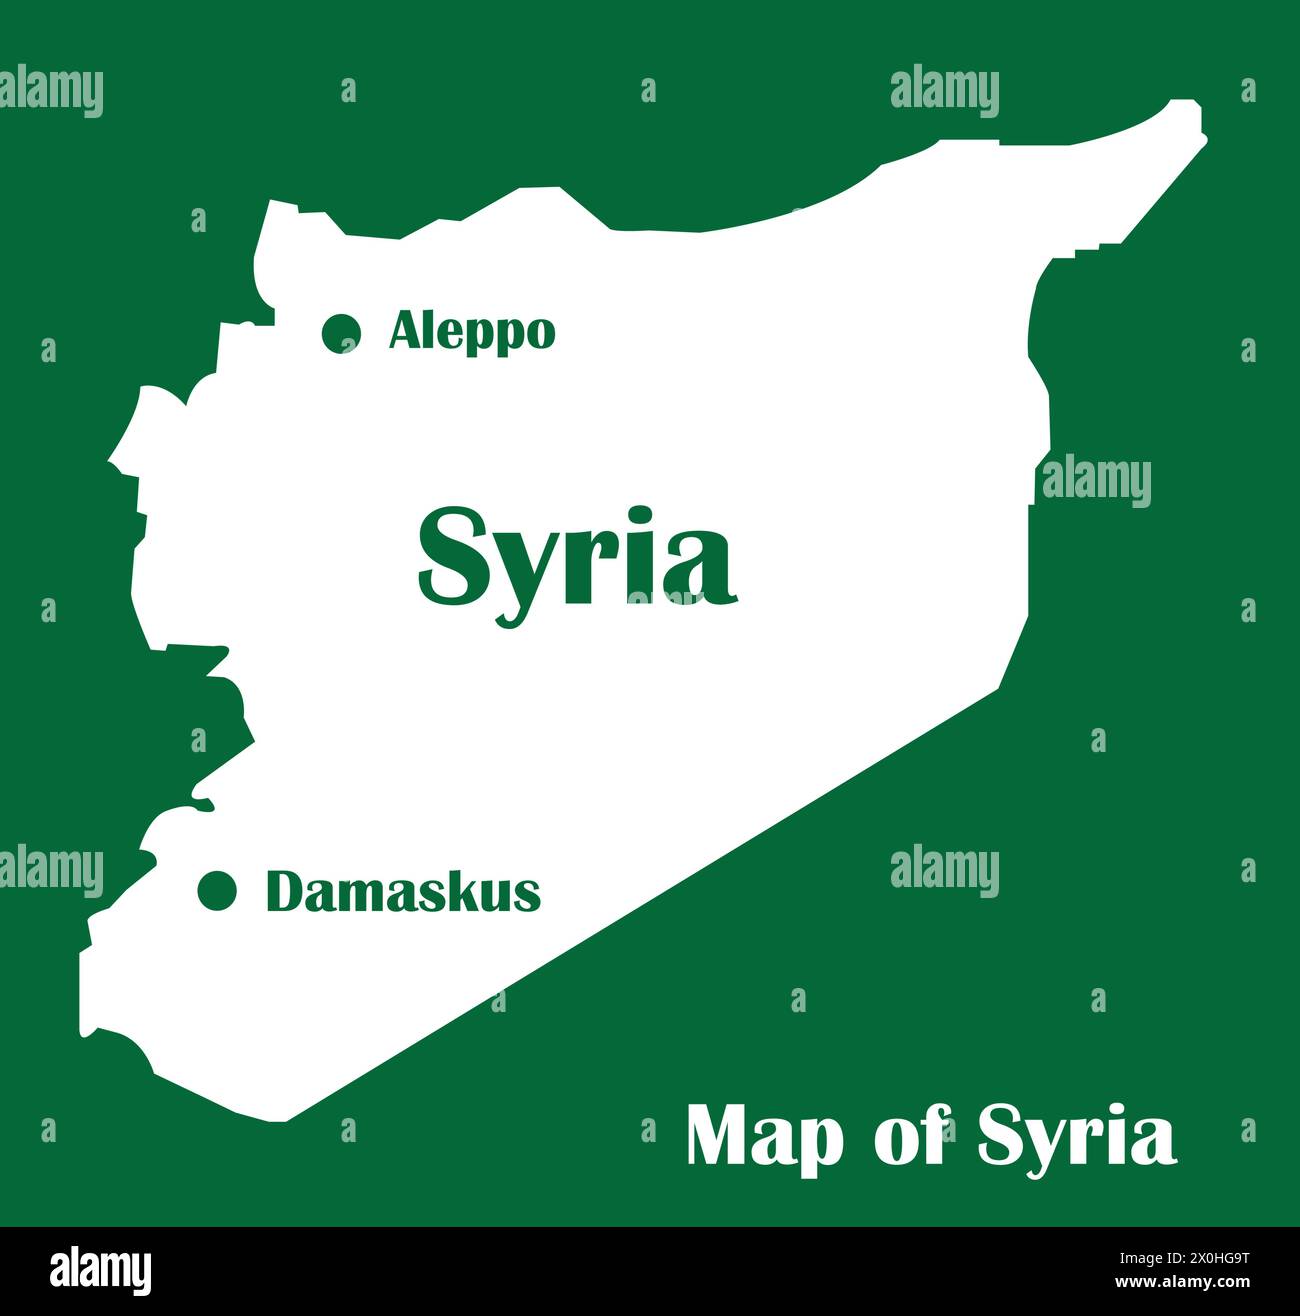 syria country map vector illustration symbol design Stock Vector